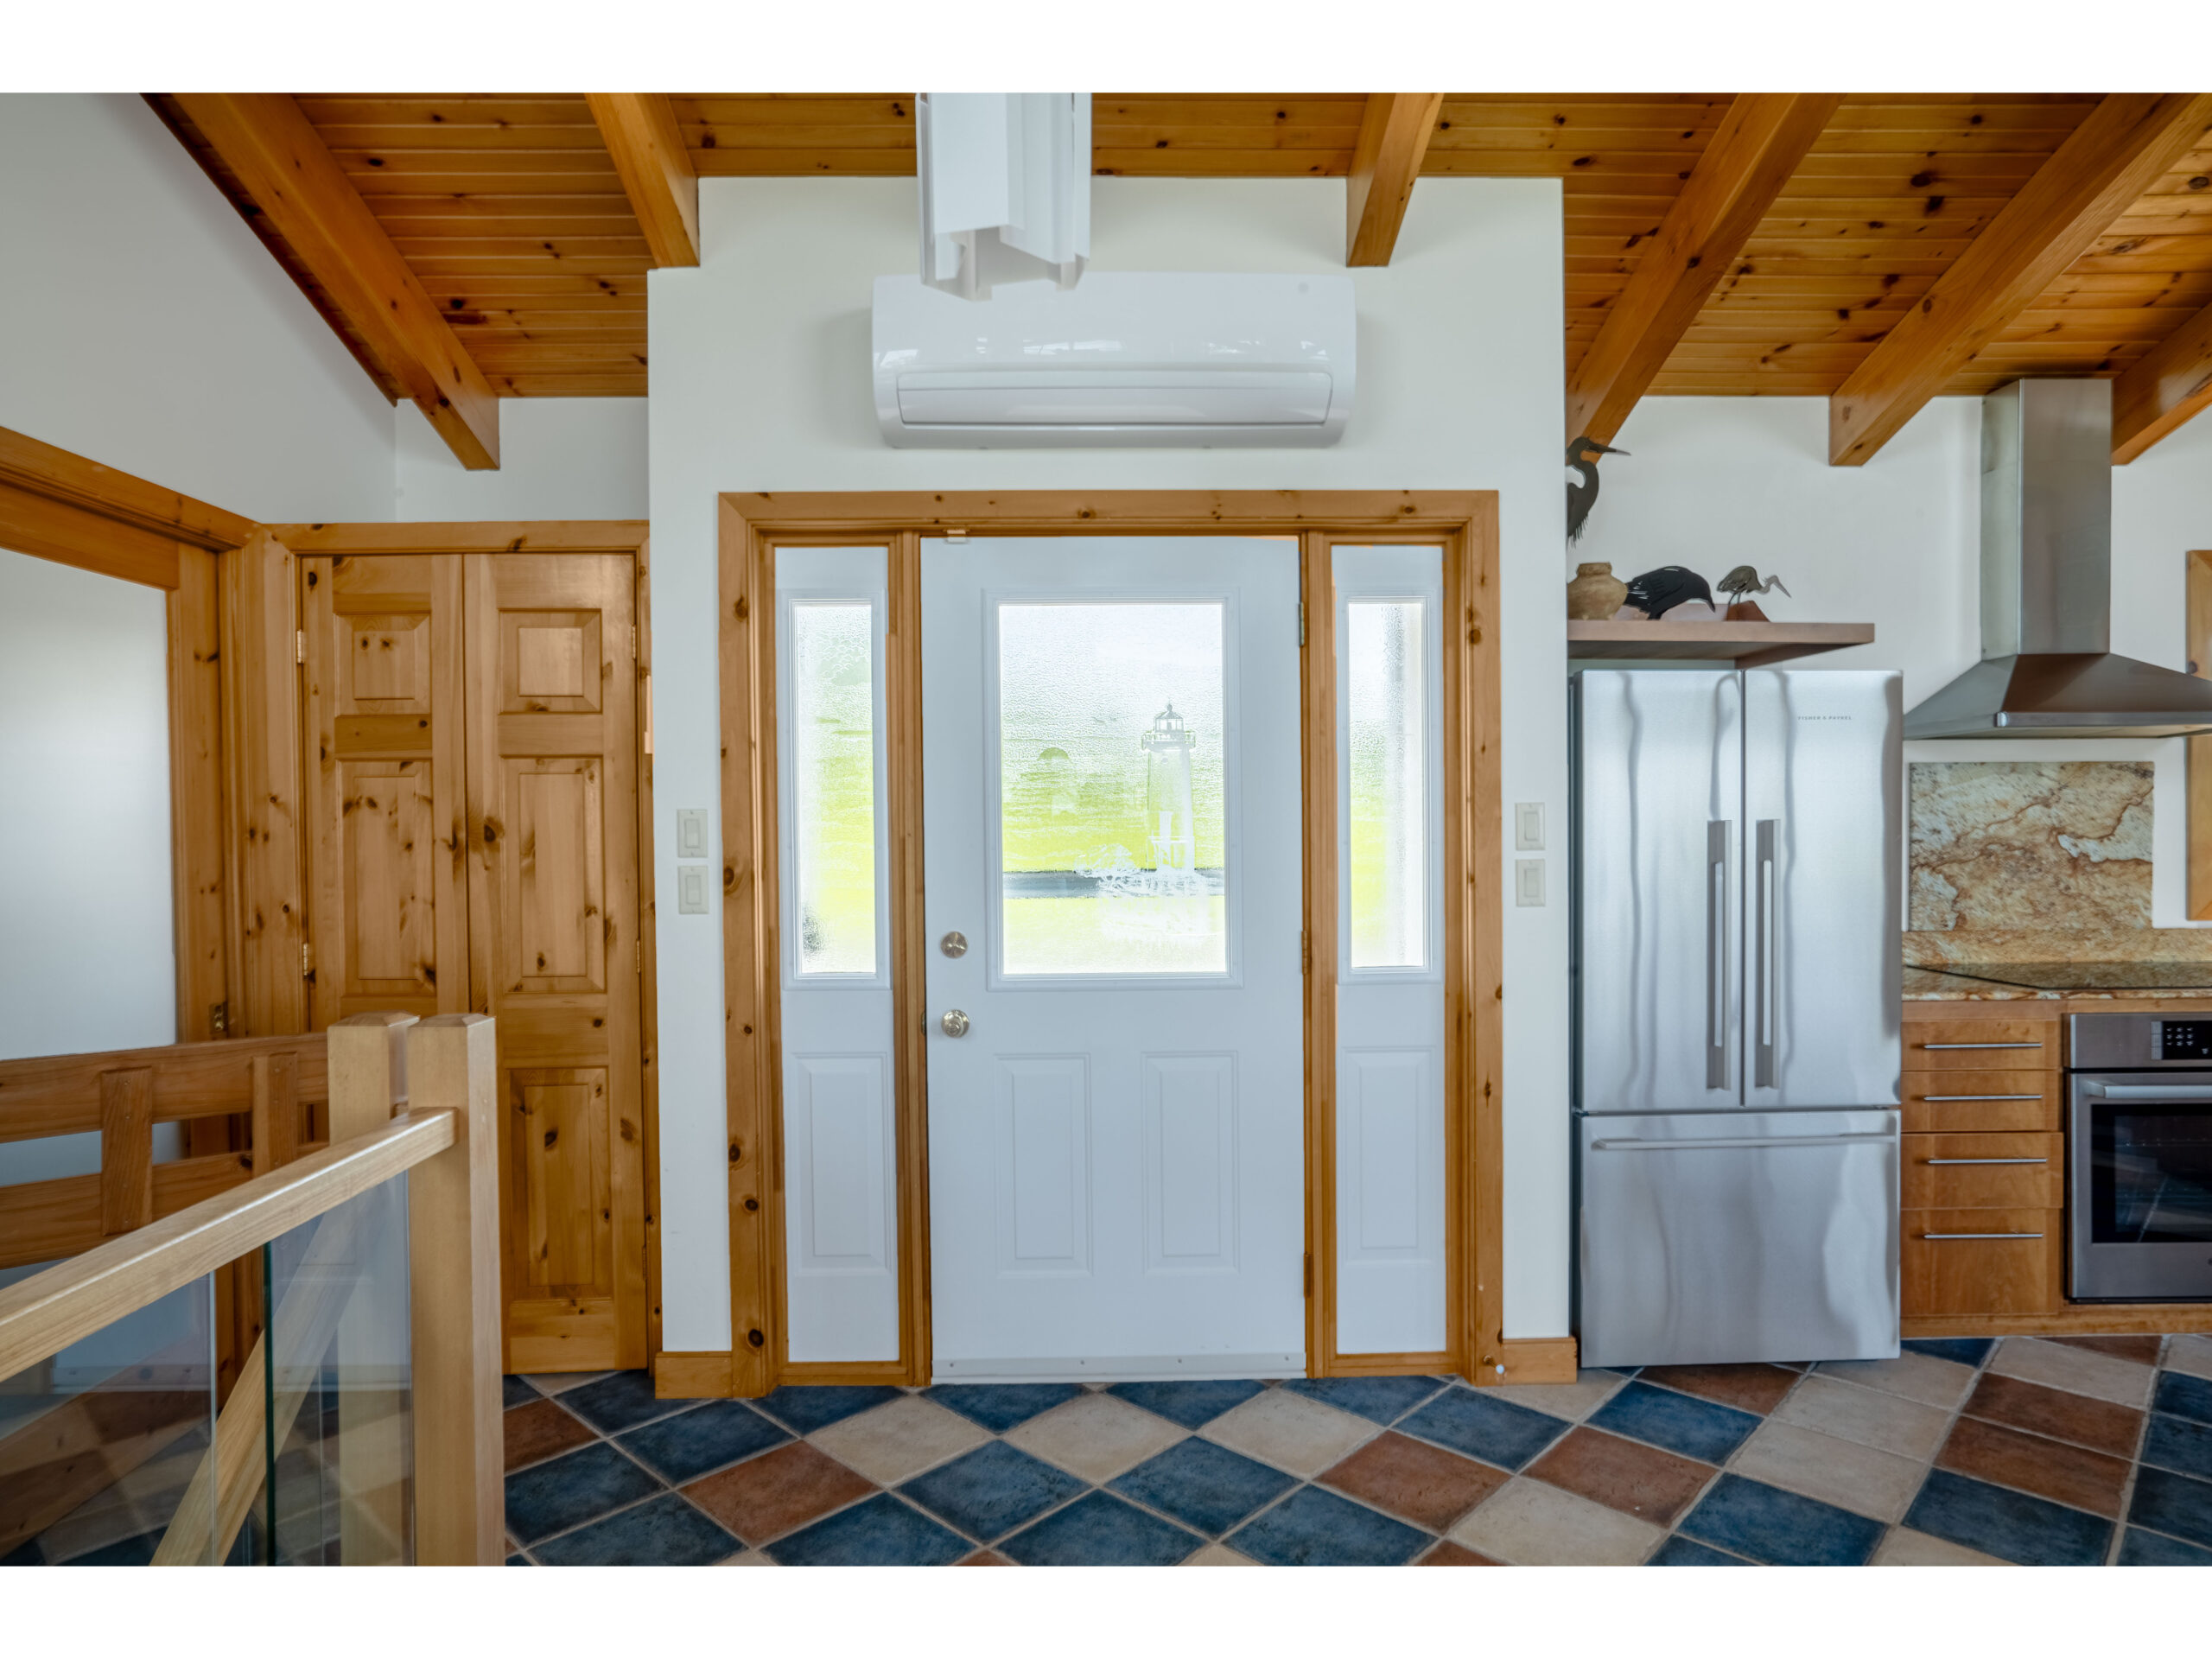 A big front entrance way with a white door framed in wooden trim. To the right is a fridge in the kitchen. The floor is tiled with red, blue, and beige tiles.